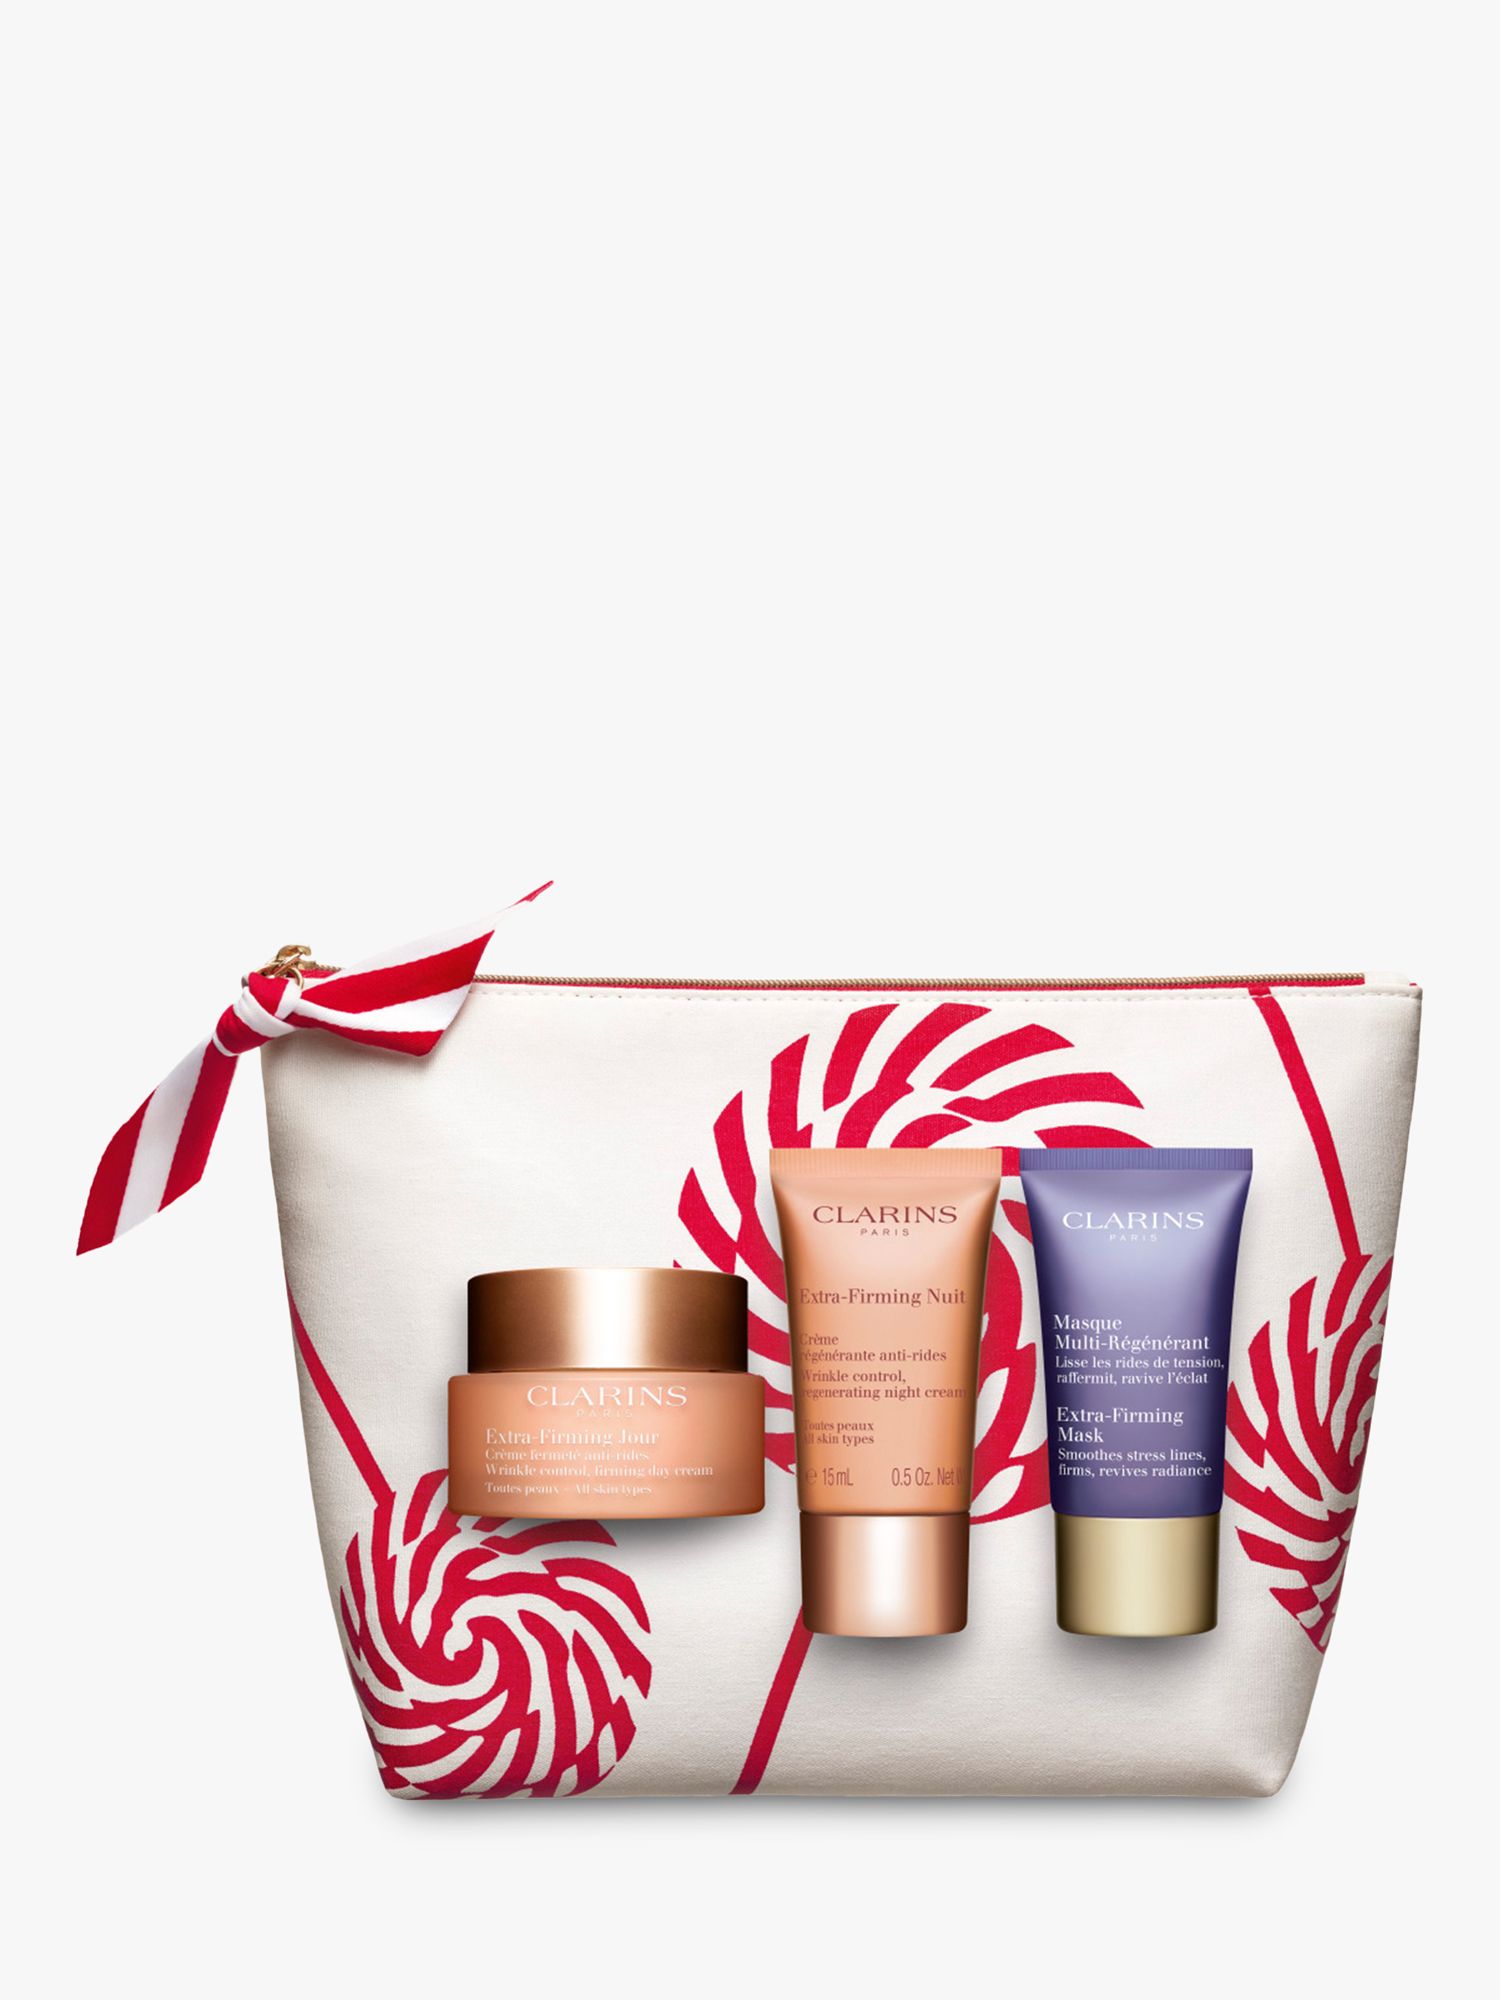 Clarins ExtraFirming Collection Skincare Gift Set at John